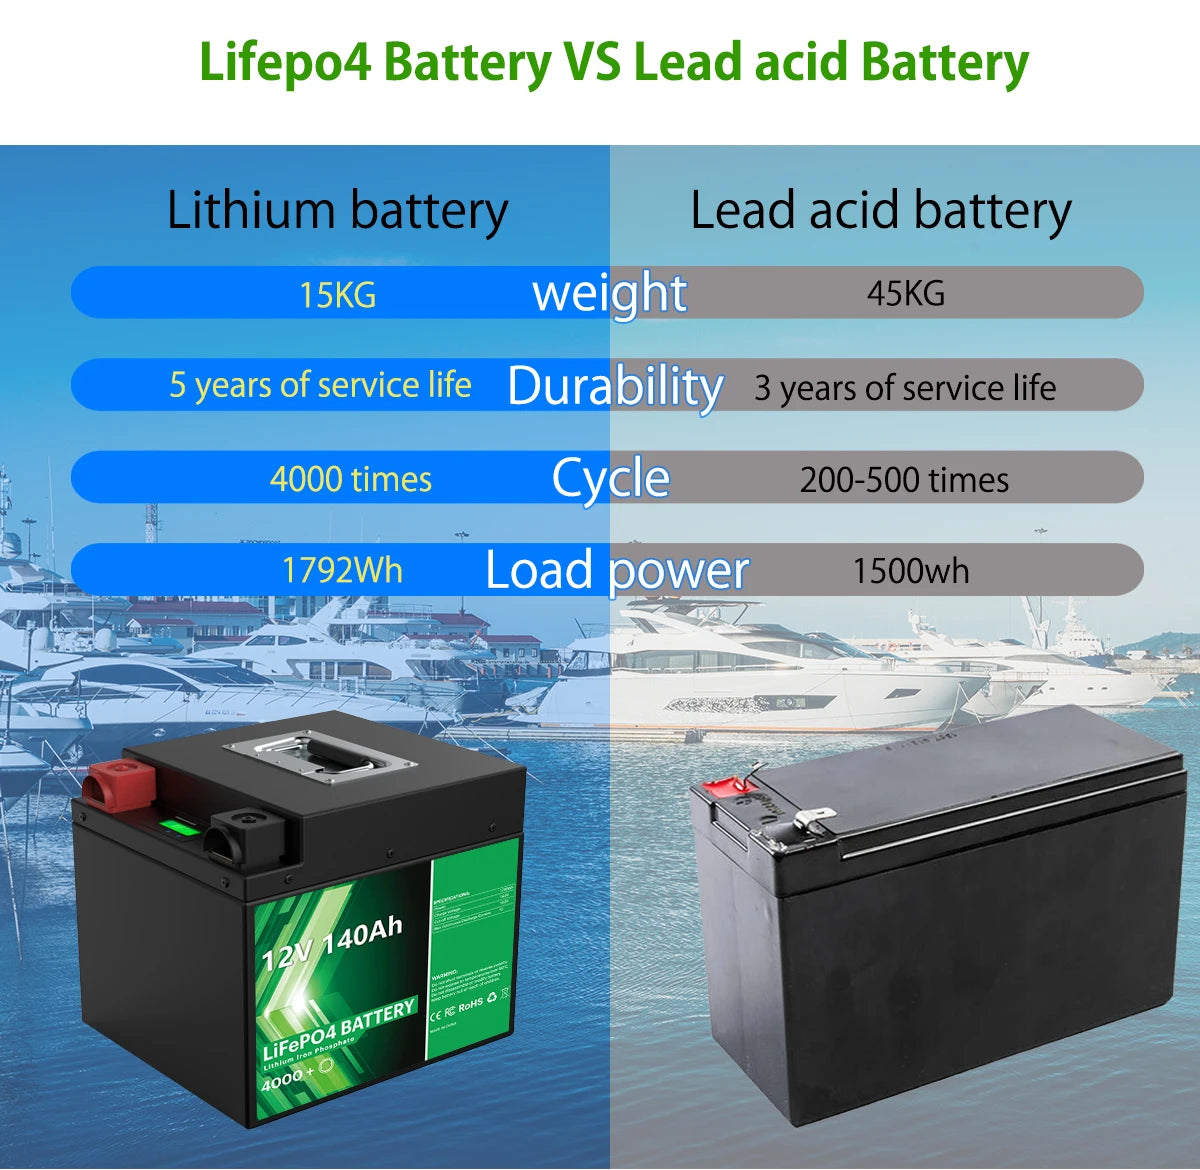 12V 140Ah LiFePO4 Battery, LiFePO4 battery outperforms Lead-Acid batteries in performance, weight, lifespan, and cycles.